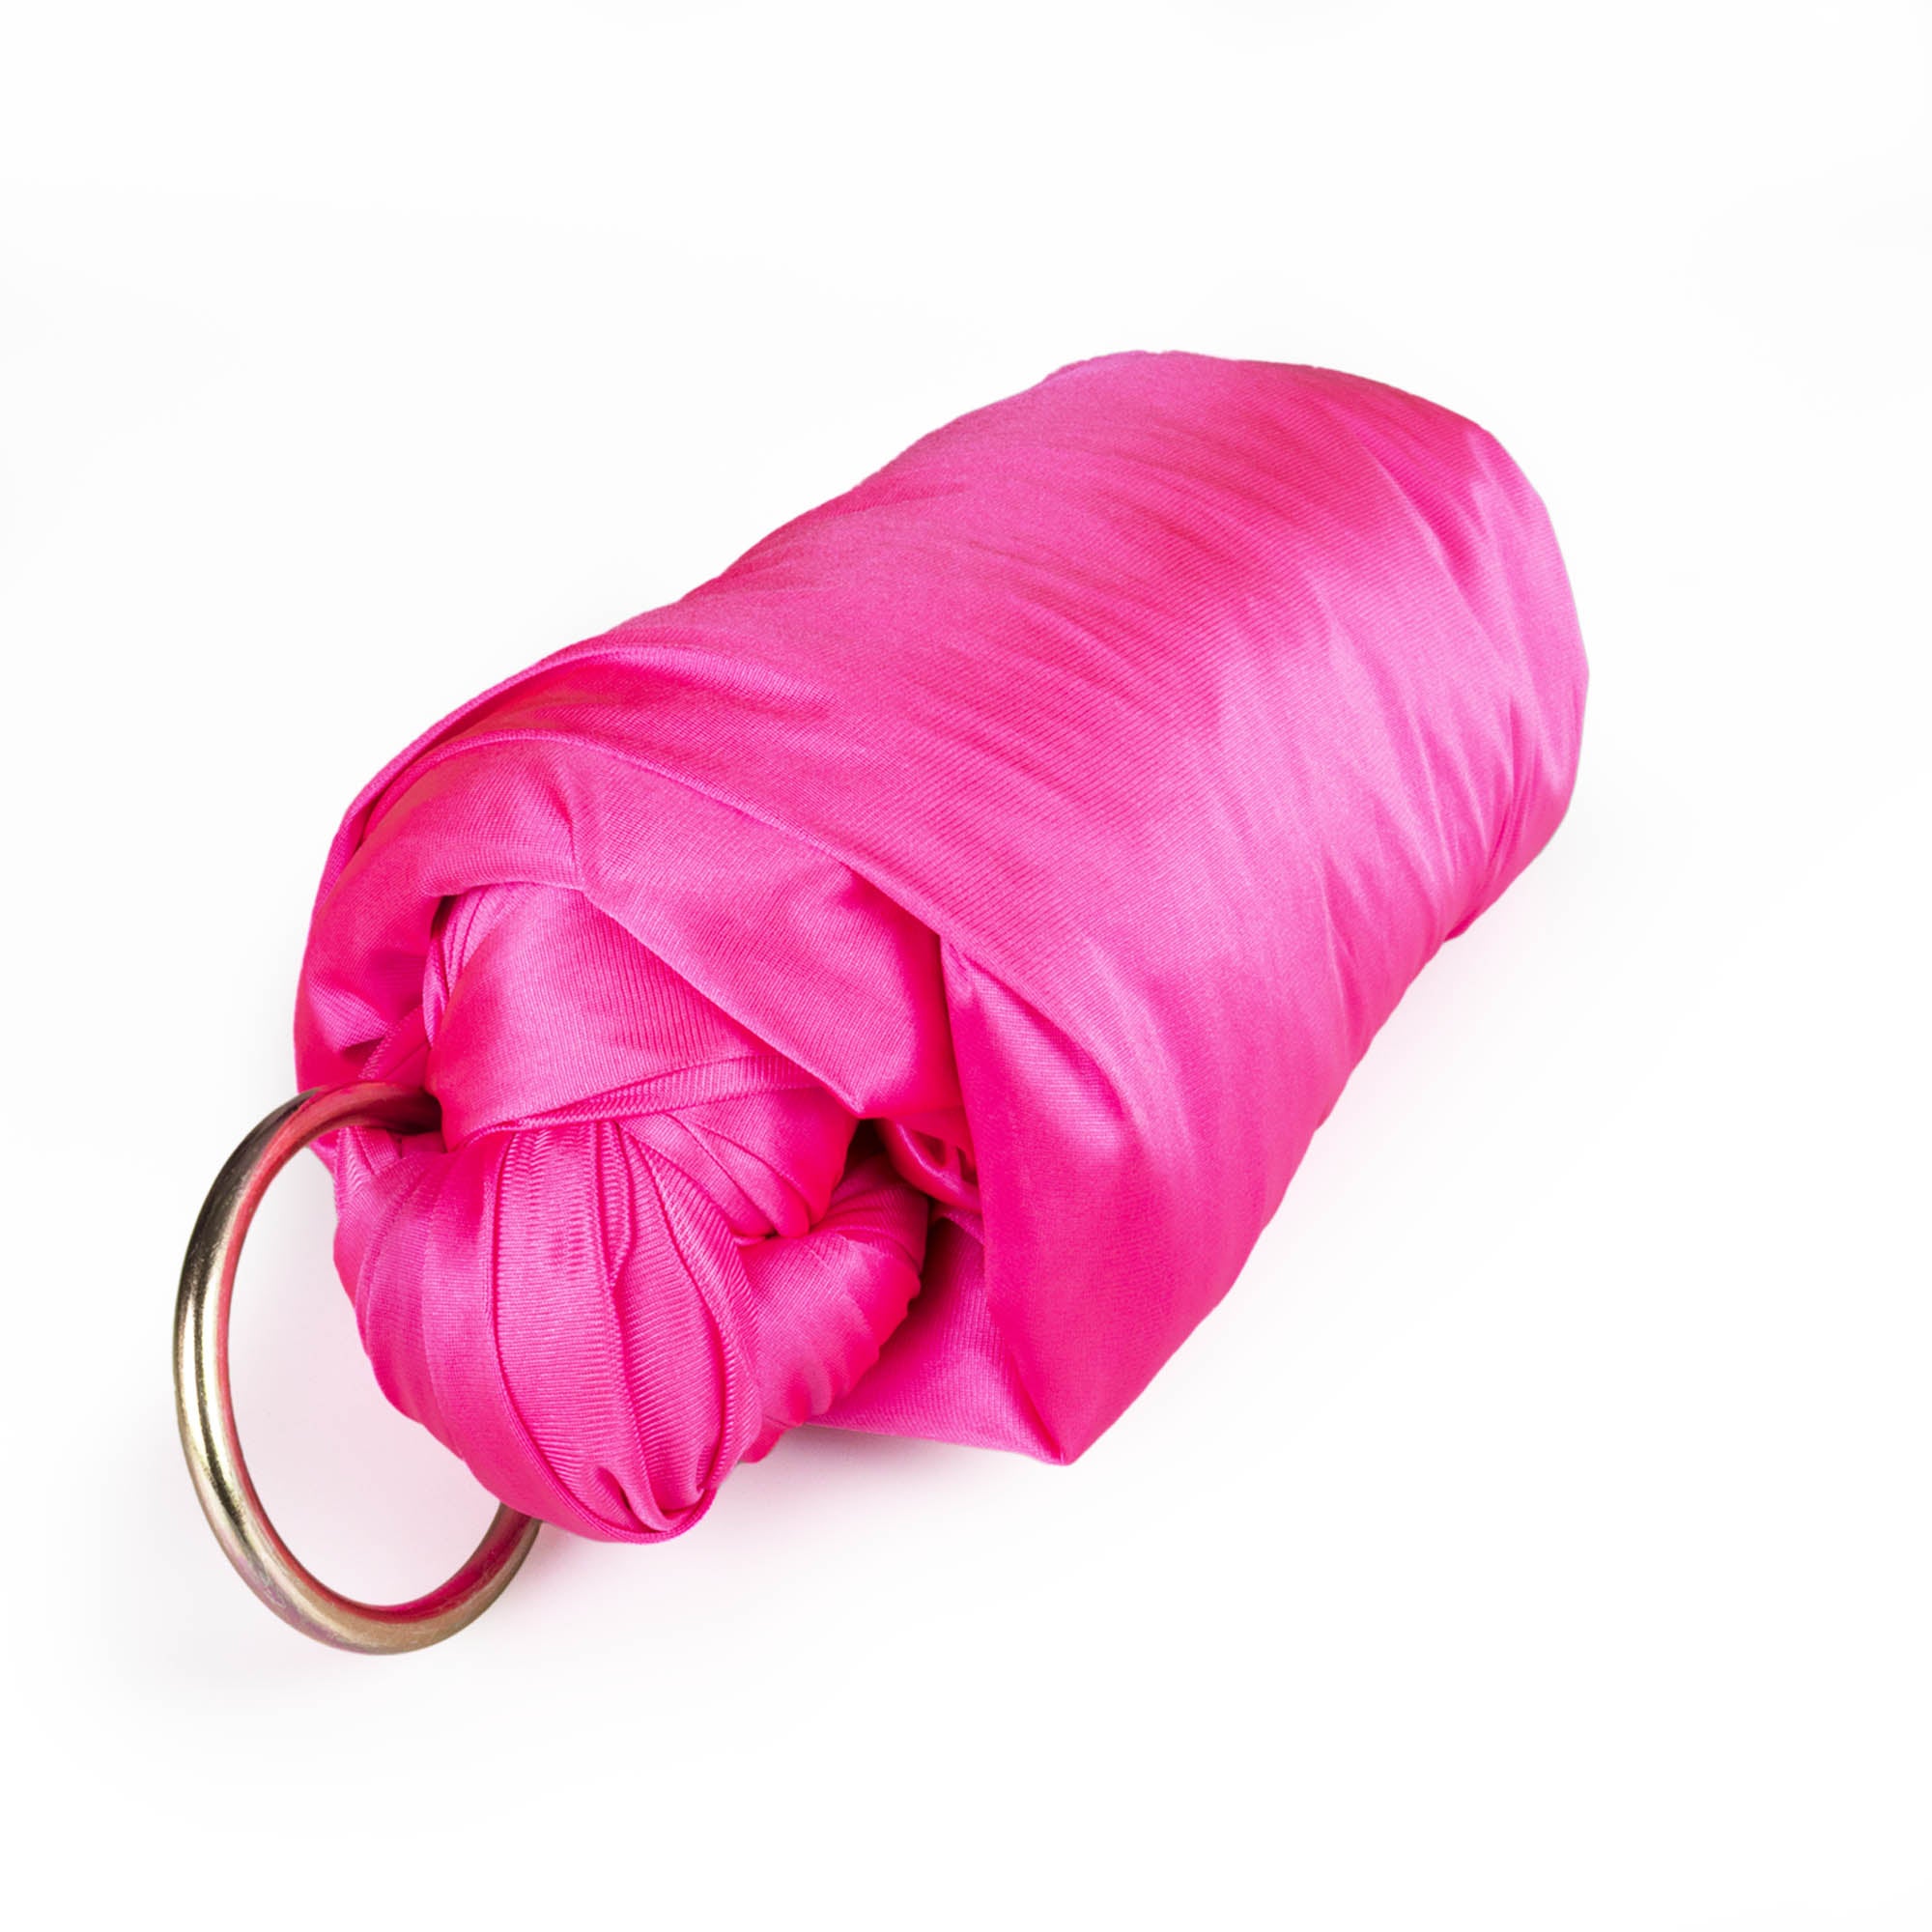 Pink yoga hammock rolled up with ring attached